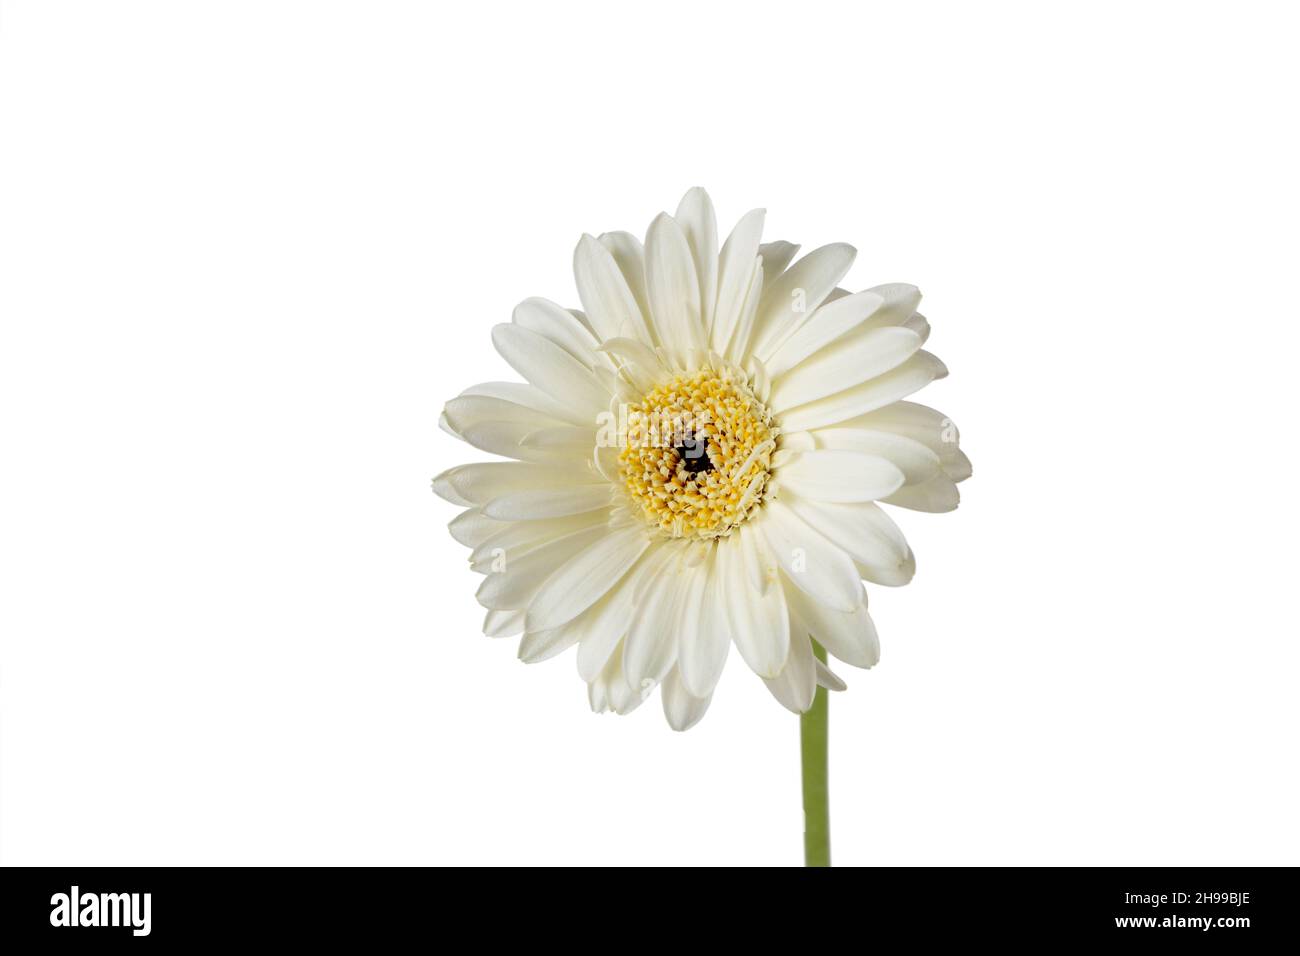 Gerbera flower head with bright yellow center isolated on white Stock Photo